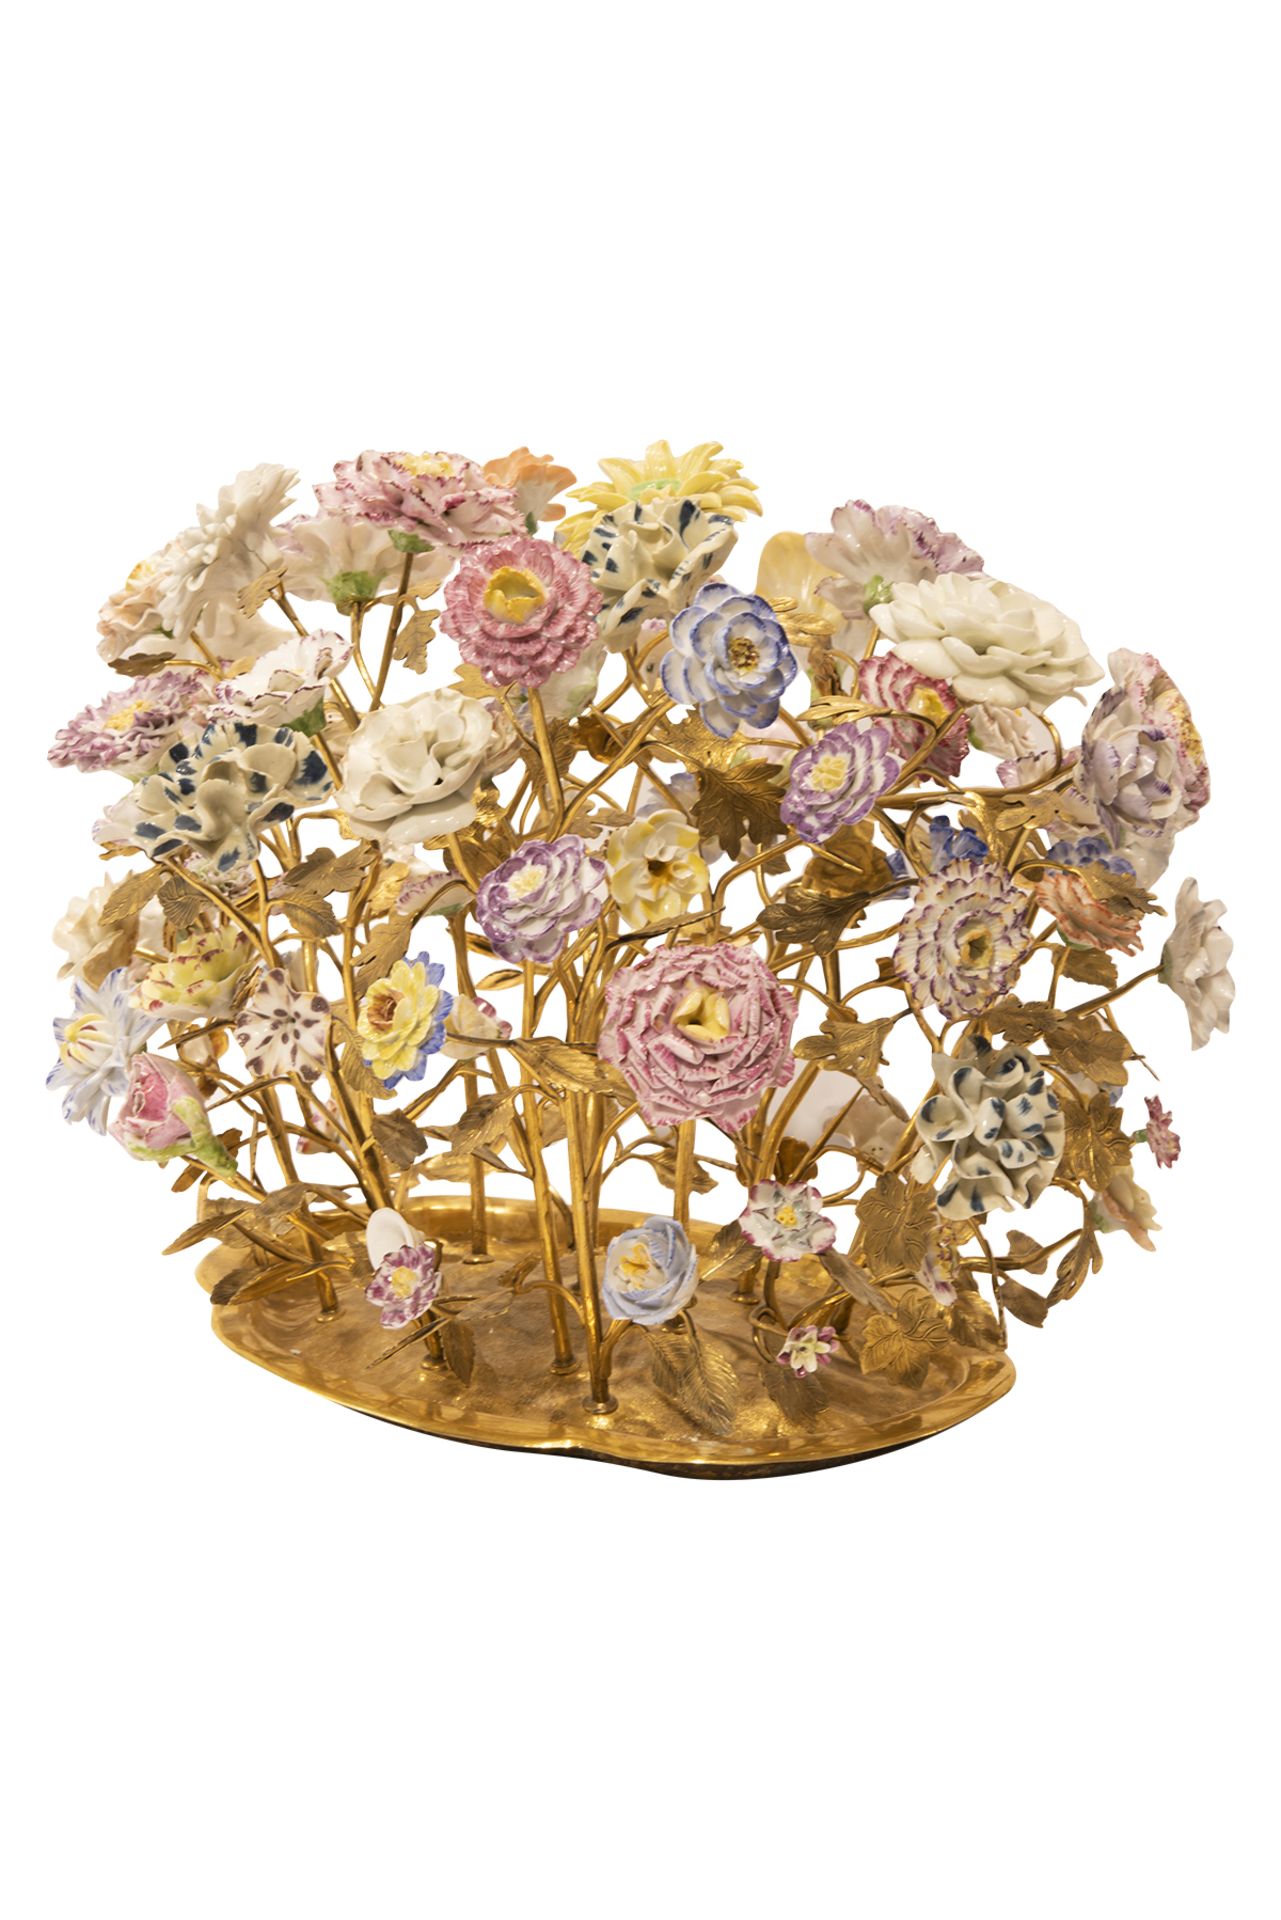 Table decoration bouquet of flowers, France and Meissen around 1900 - Image 3 of 7